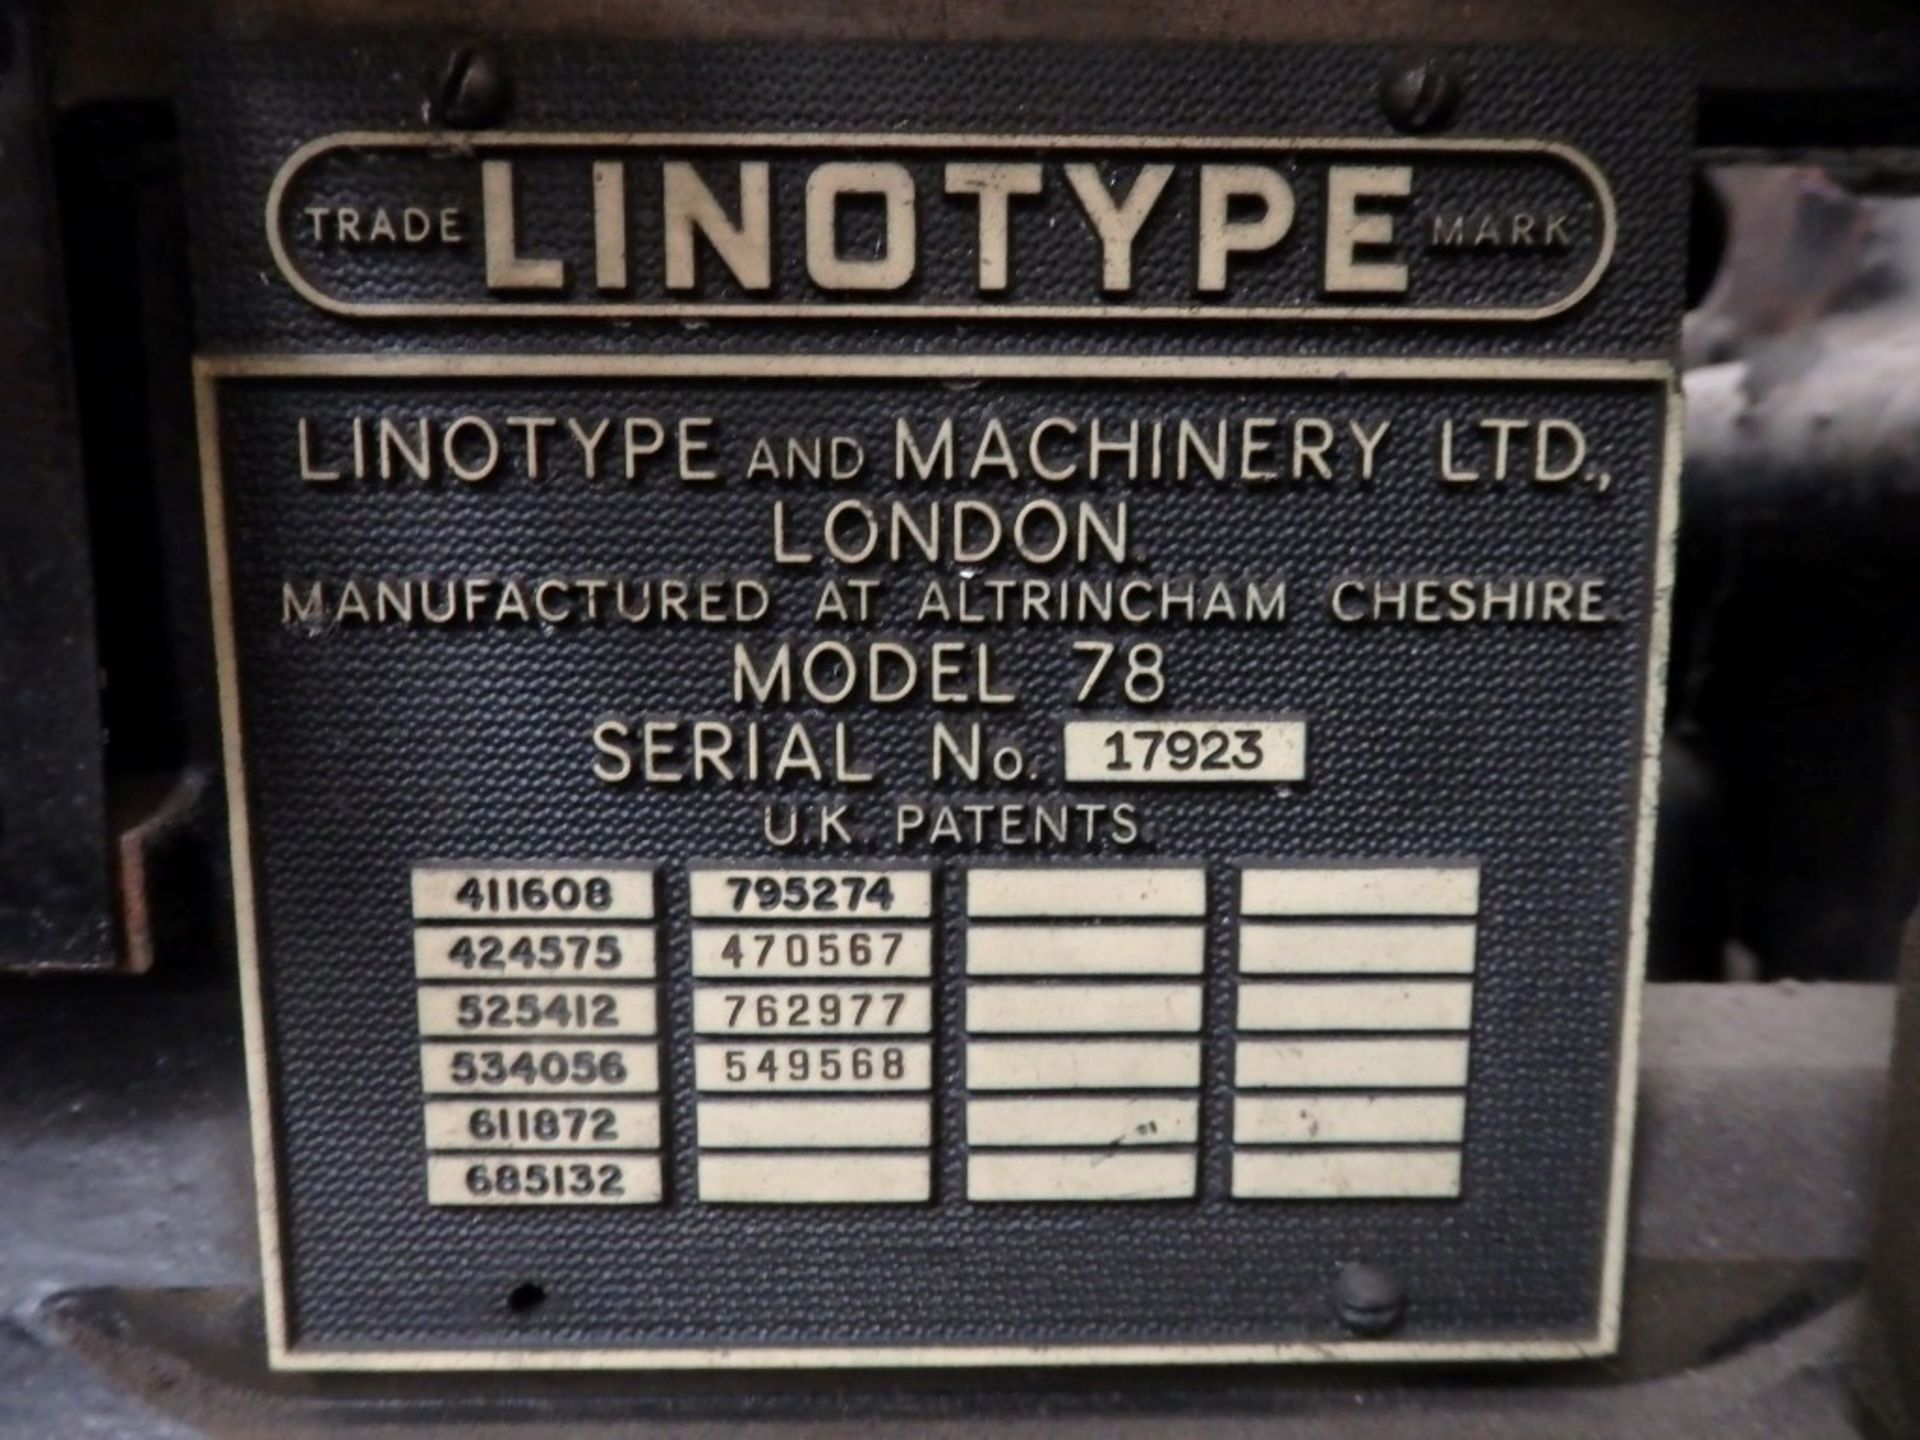 1 x Original Linotype Model 78 Printing Press - Untested In Good Aesthetic Condition - Fantastic - Image 6 of 23